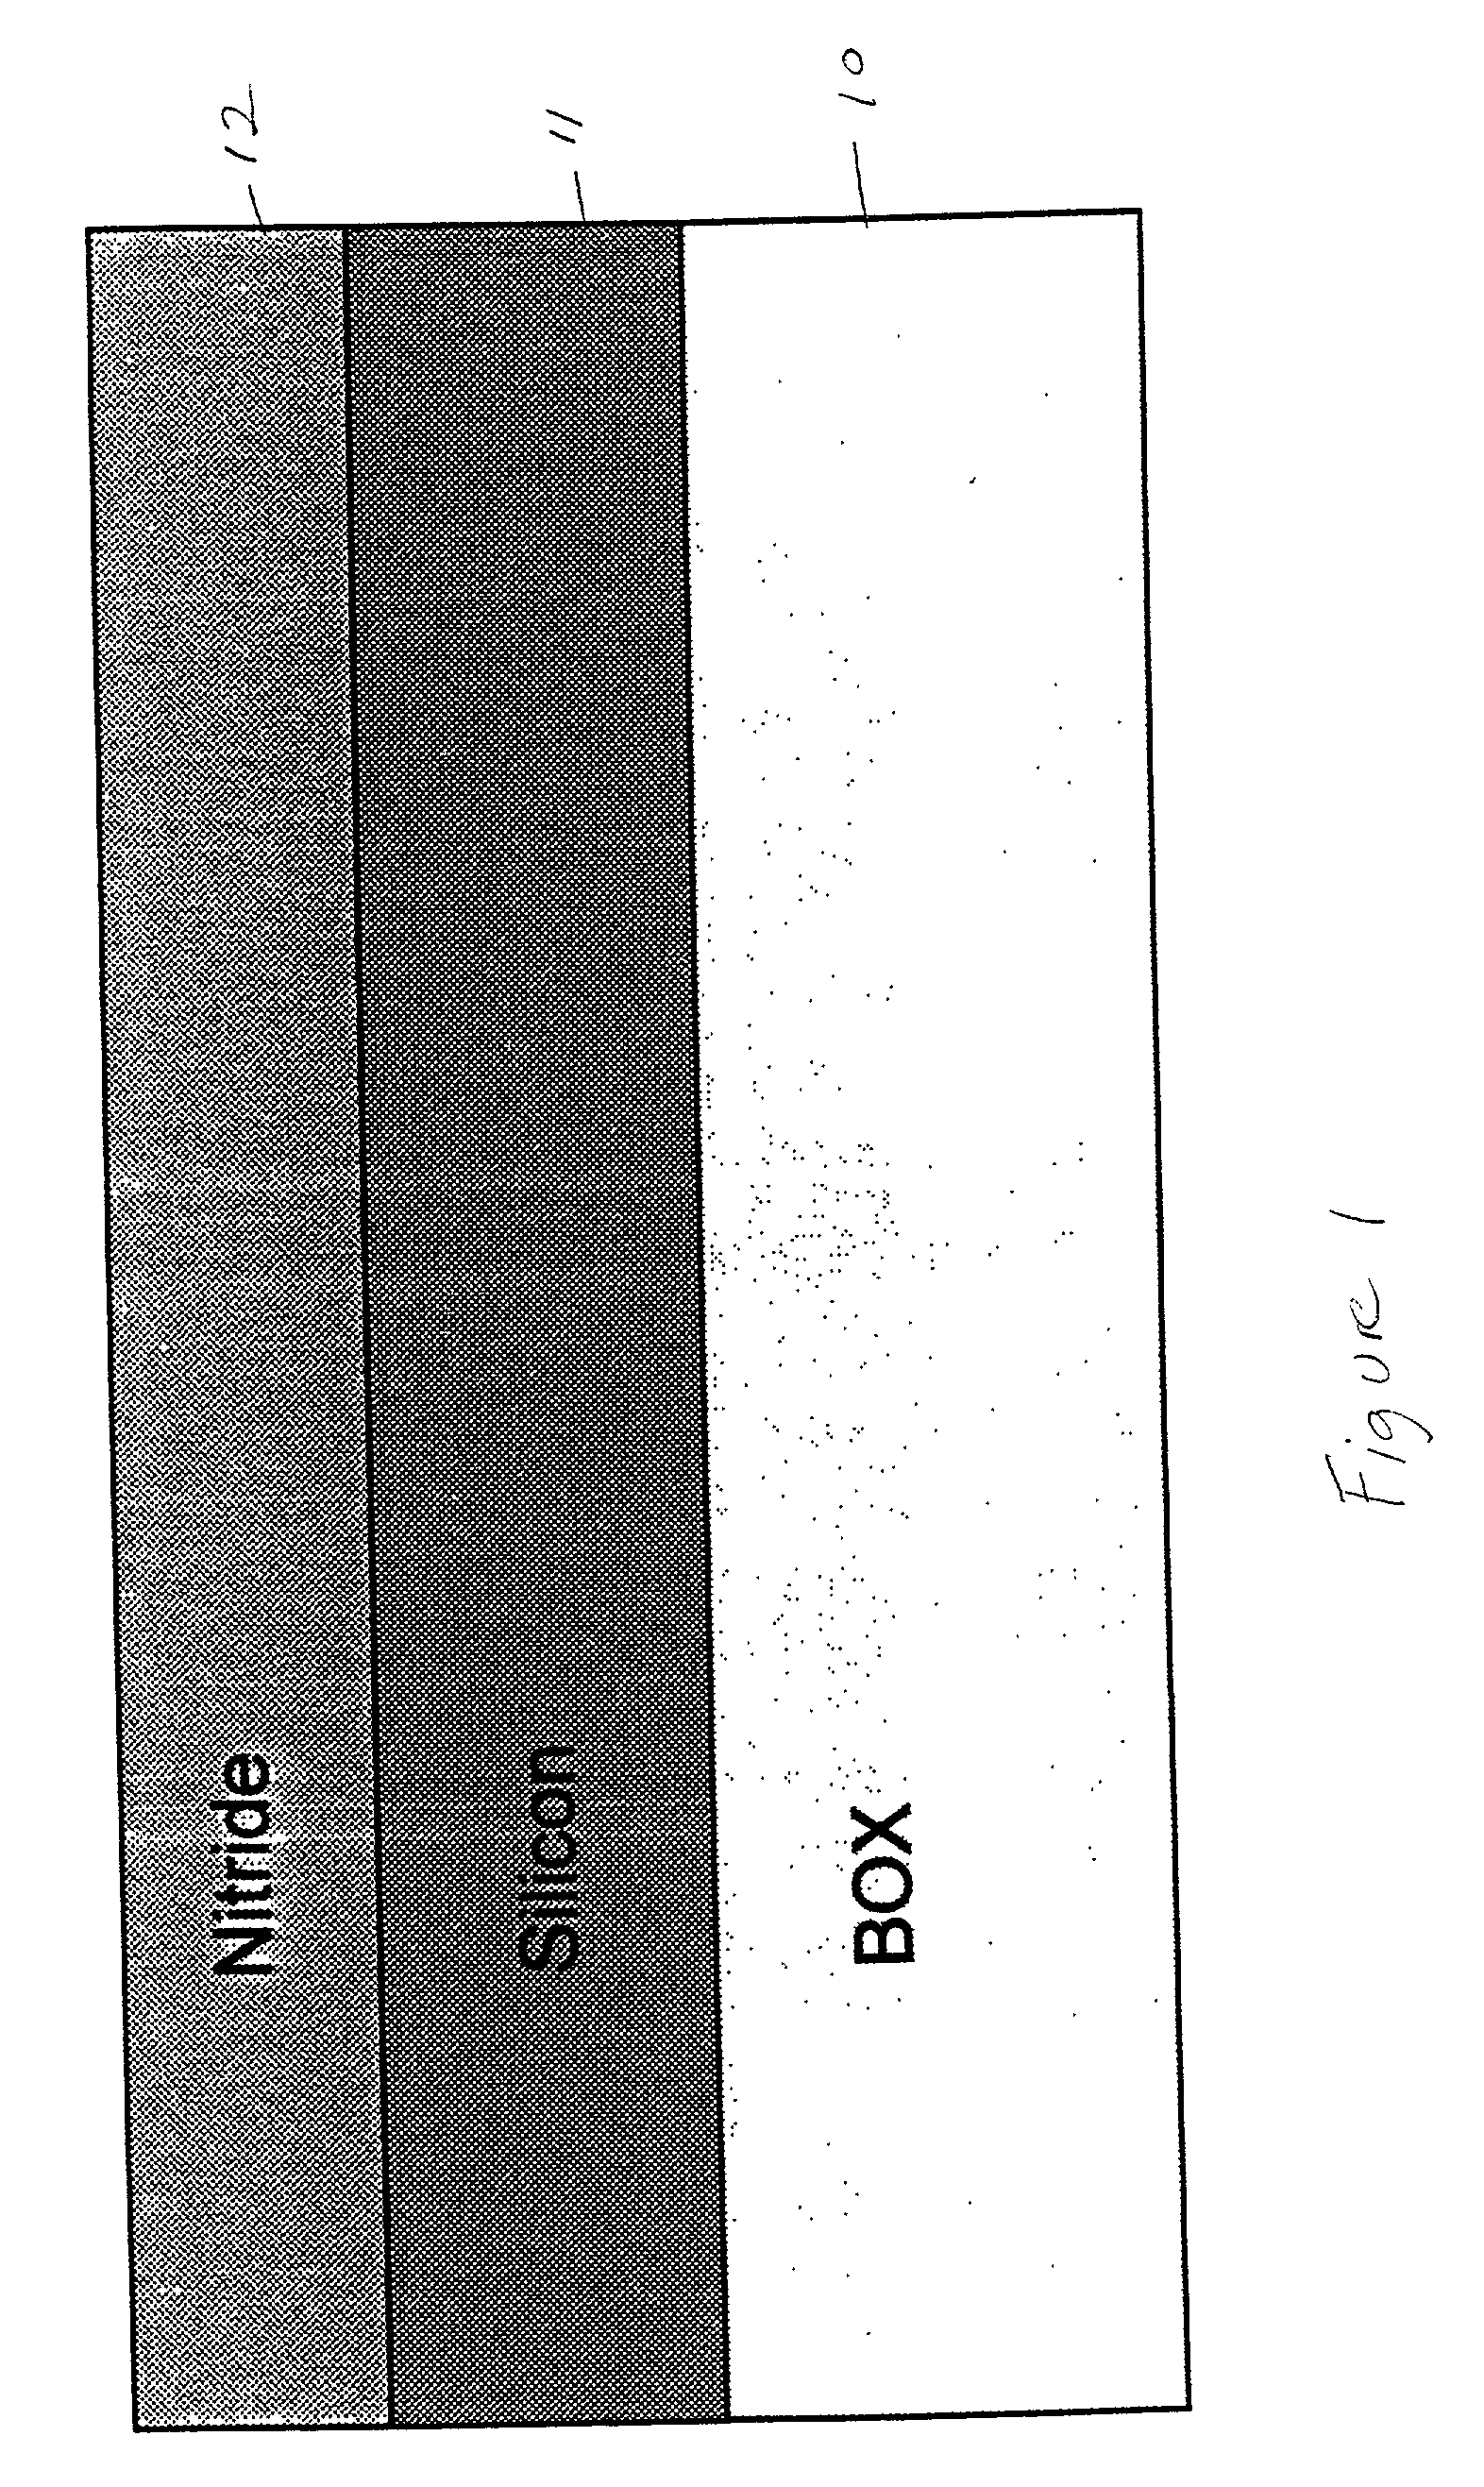 Strained fin fets structure and method